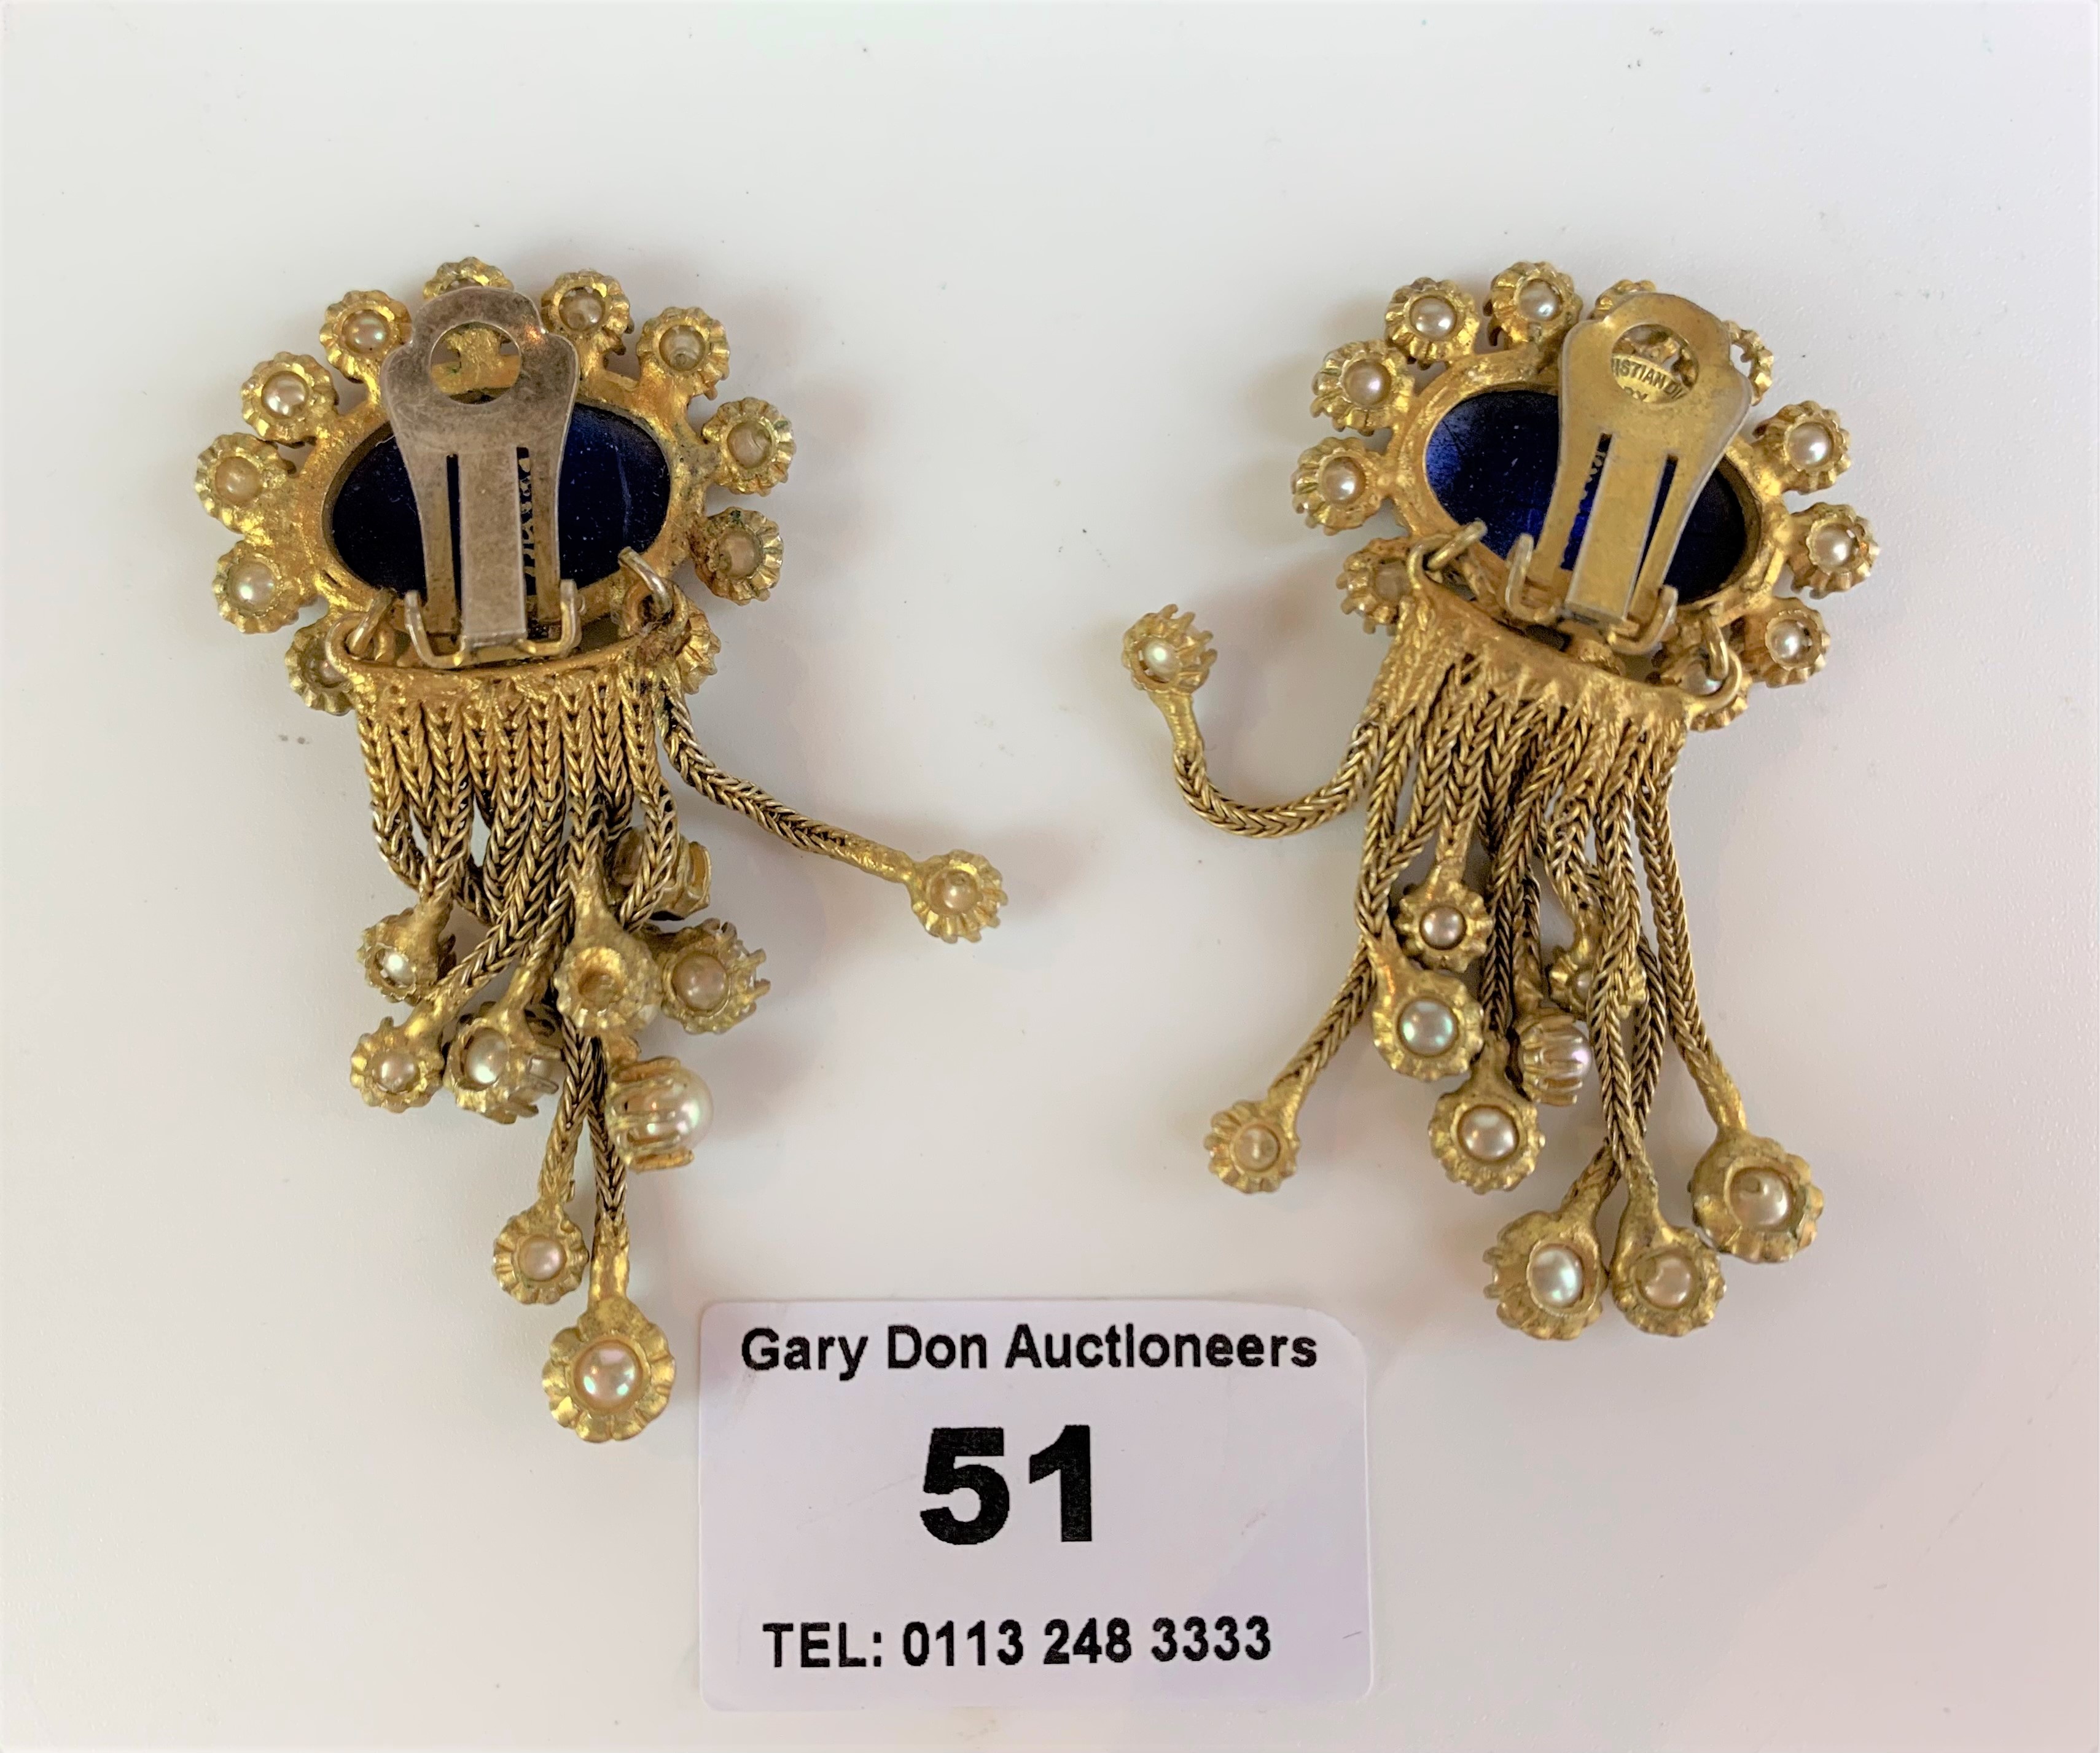 Pair of Christian Dior earrings by Michel Maer (1 pearl missing) - Image 4 of 6